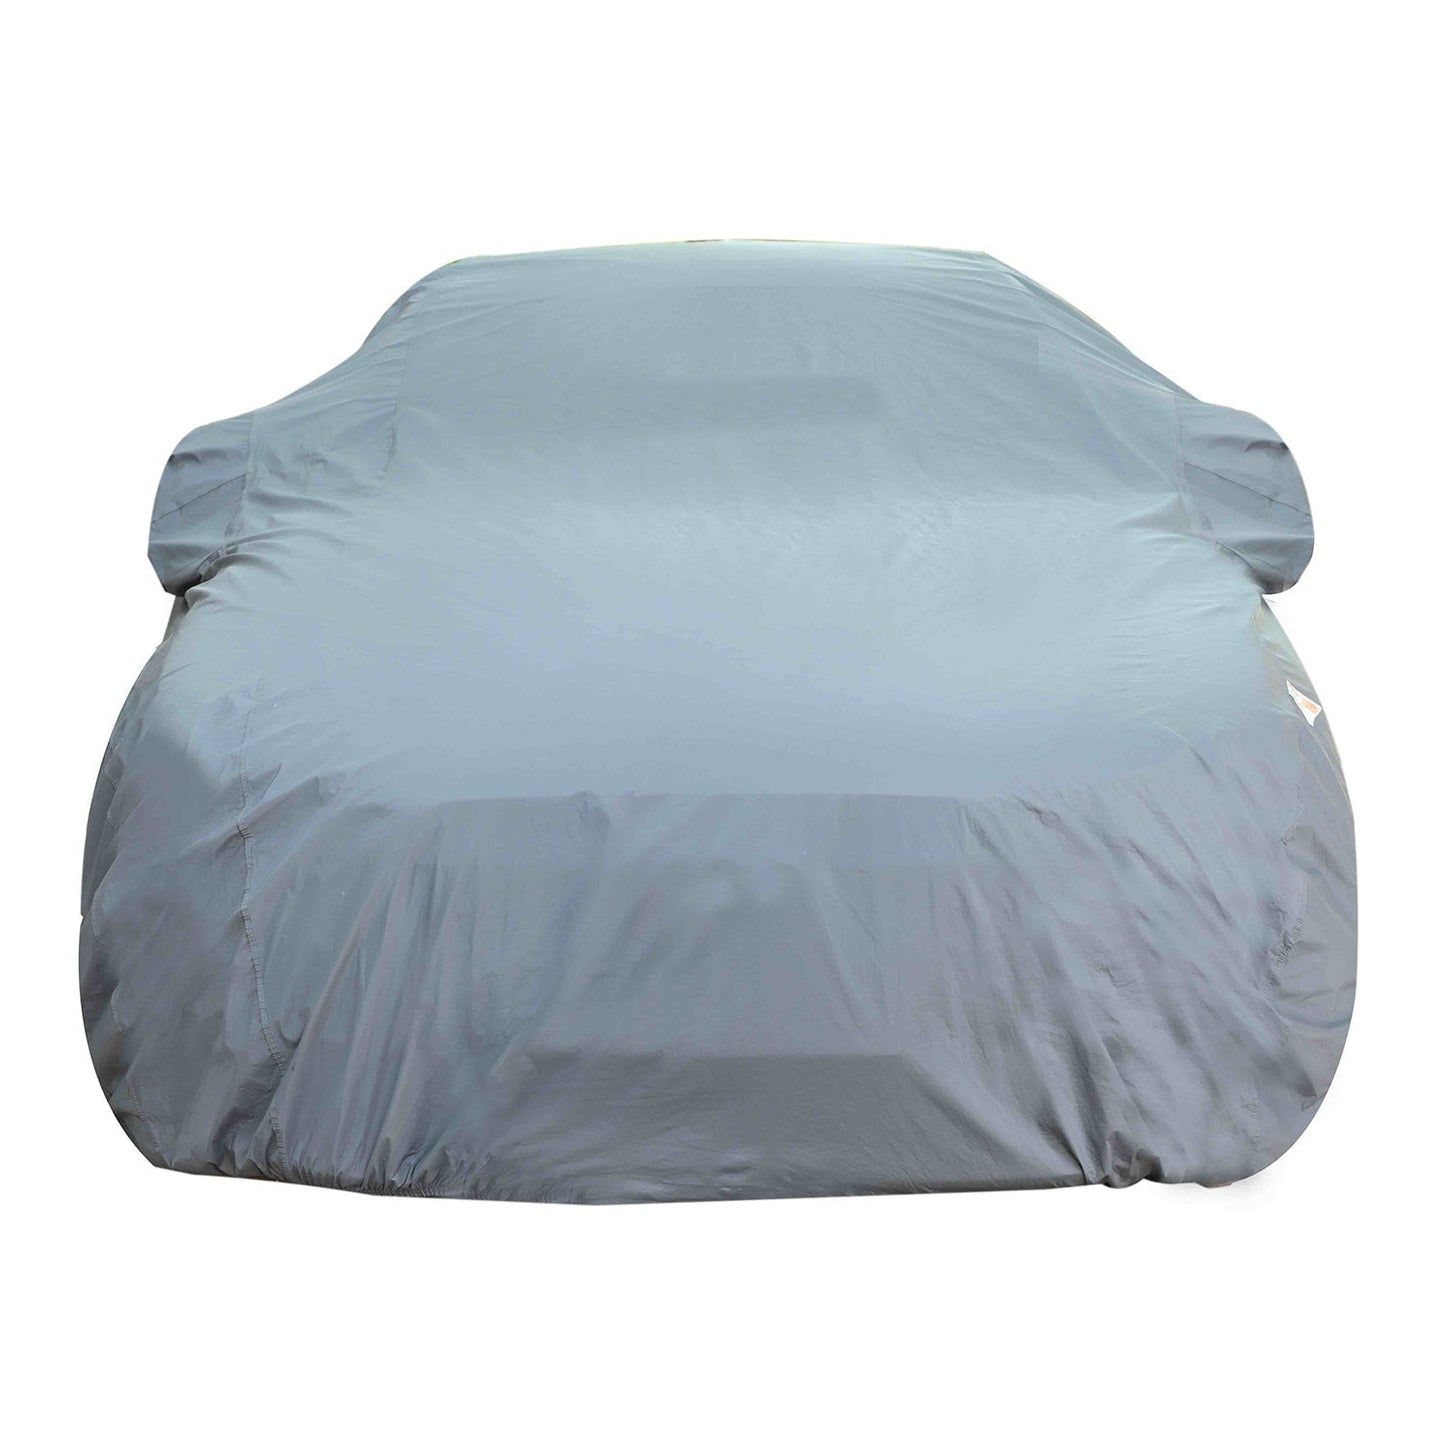 Oshotto Dark Grey 100% Anti Reflective, dustproof and Water Proof Car Body Cover with Mirror Pockets For Tata Hexa